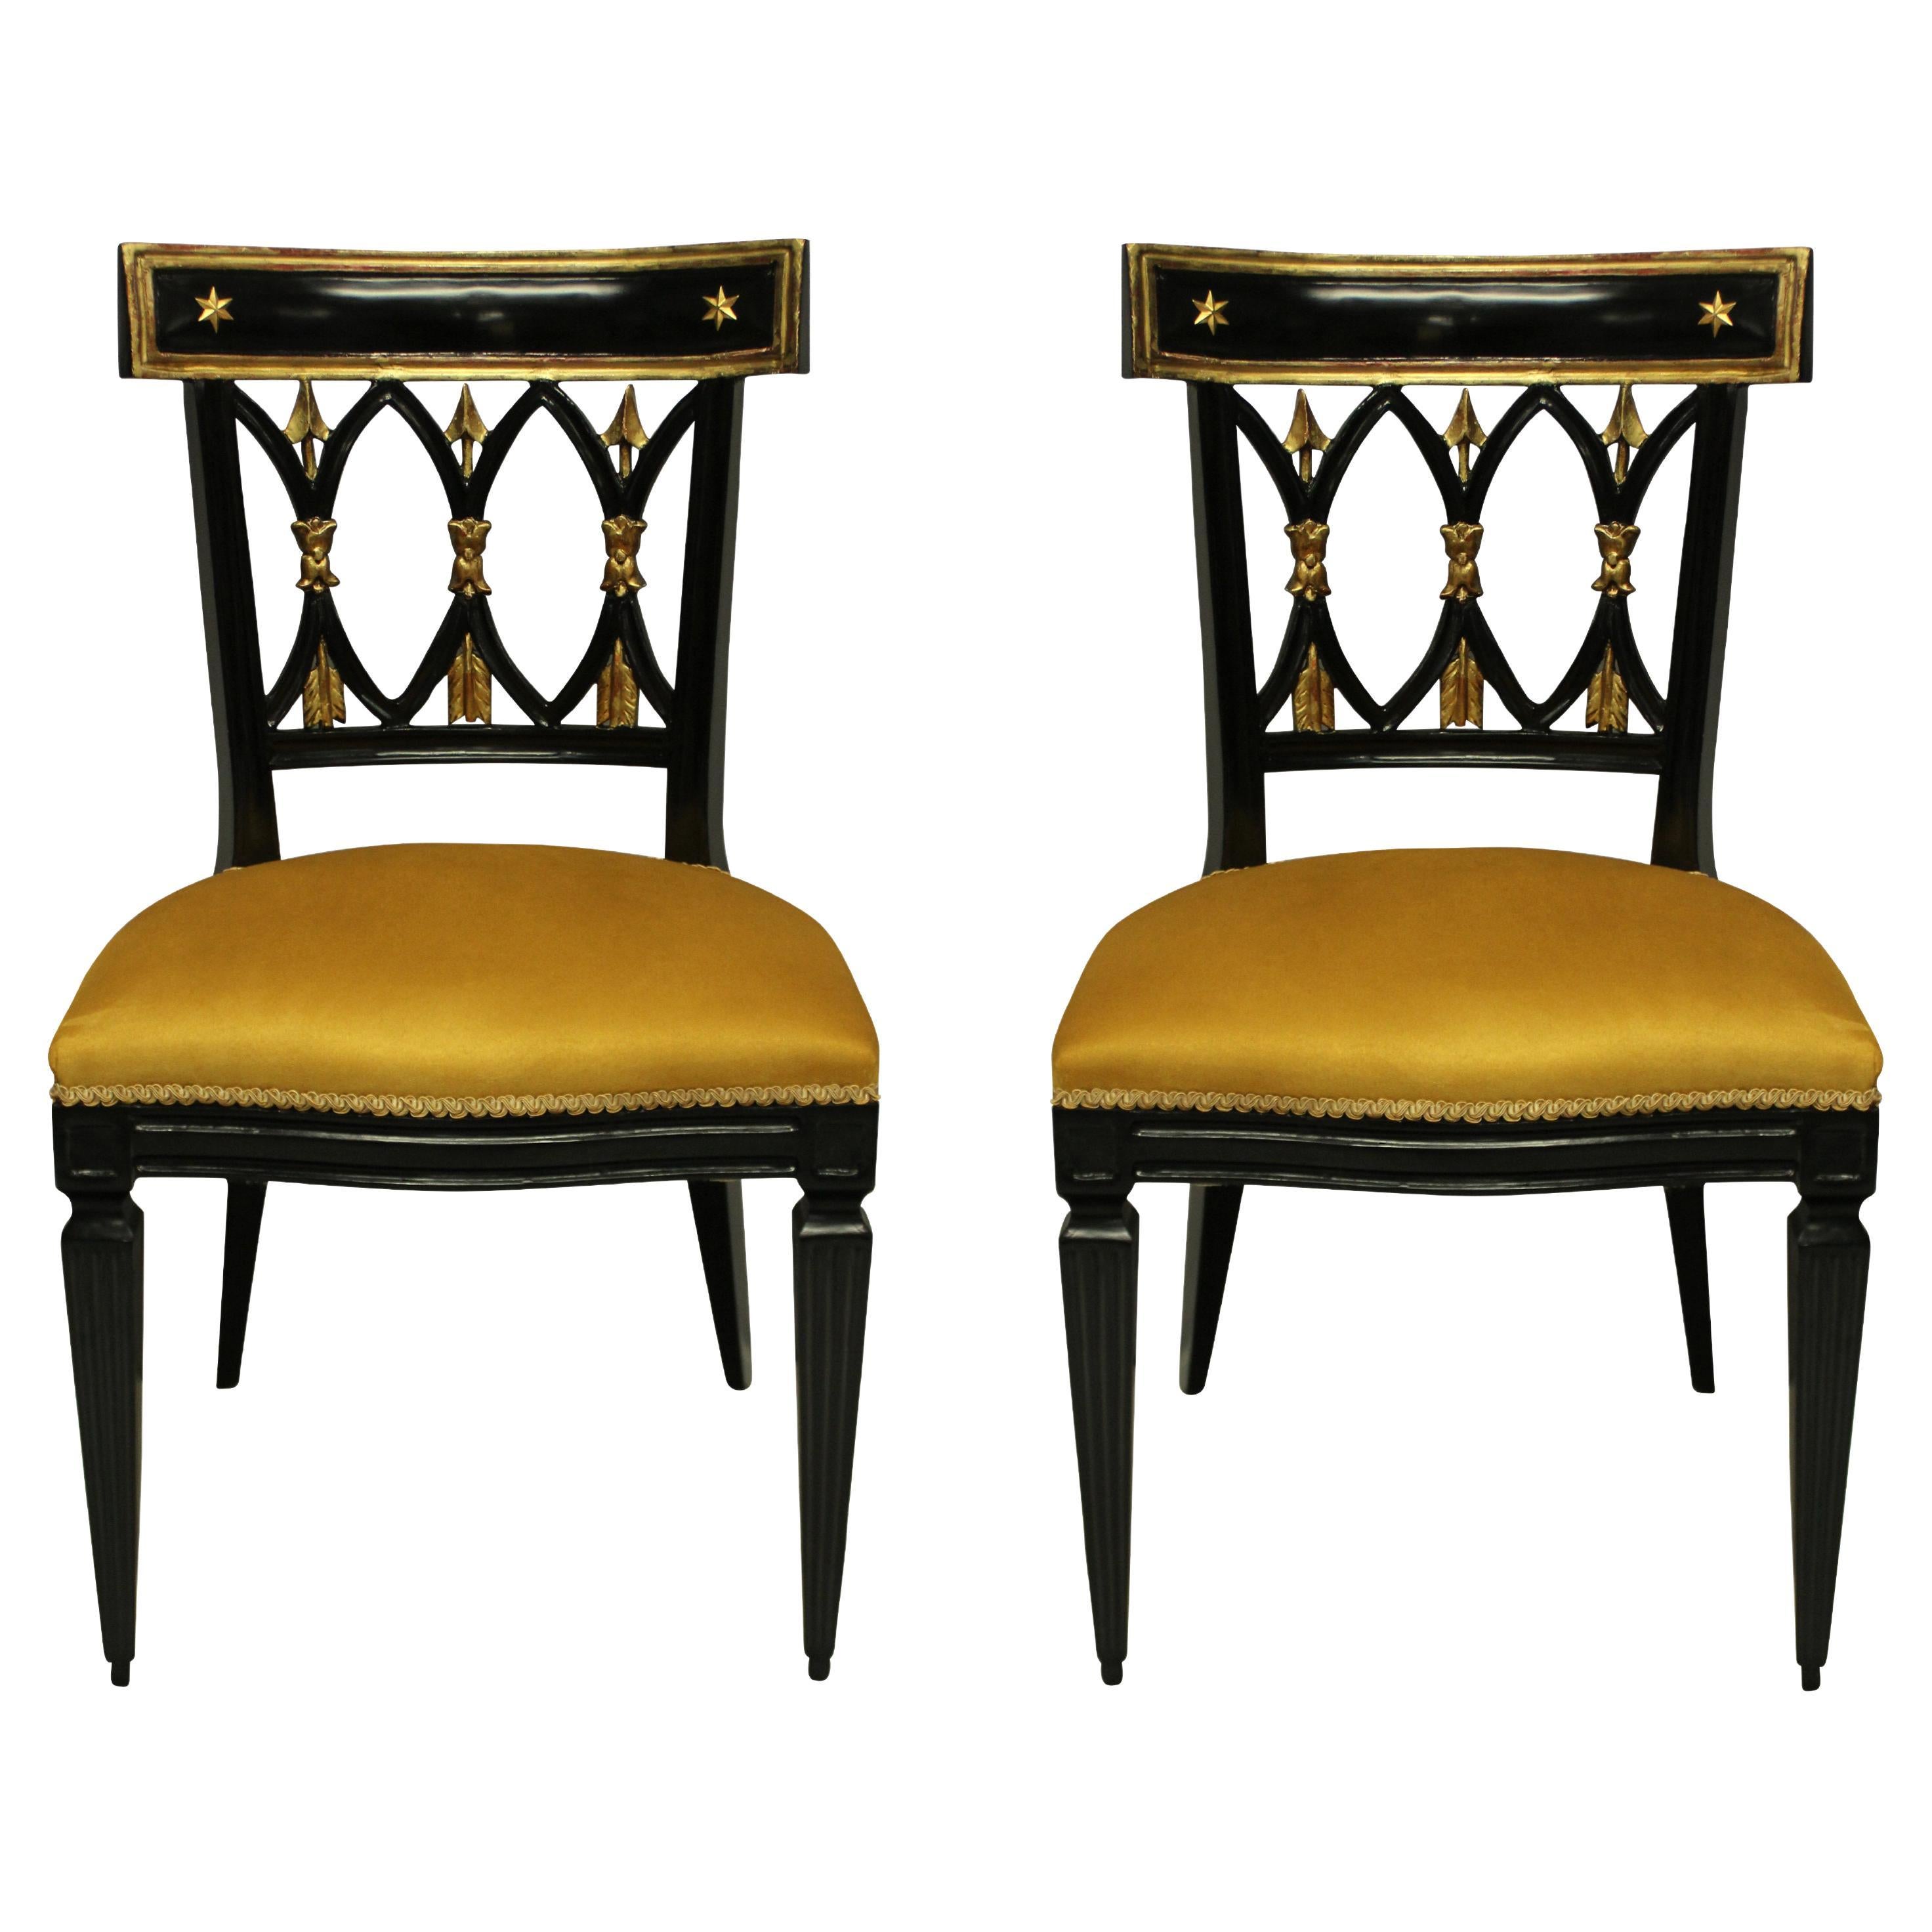 Pair of French Empire Revival Hall Chairs